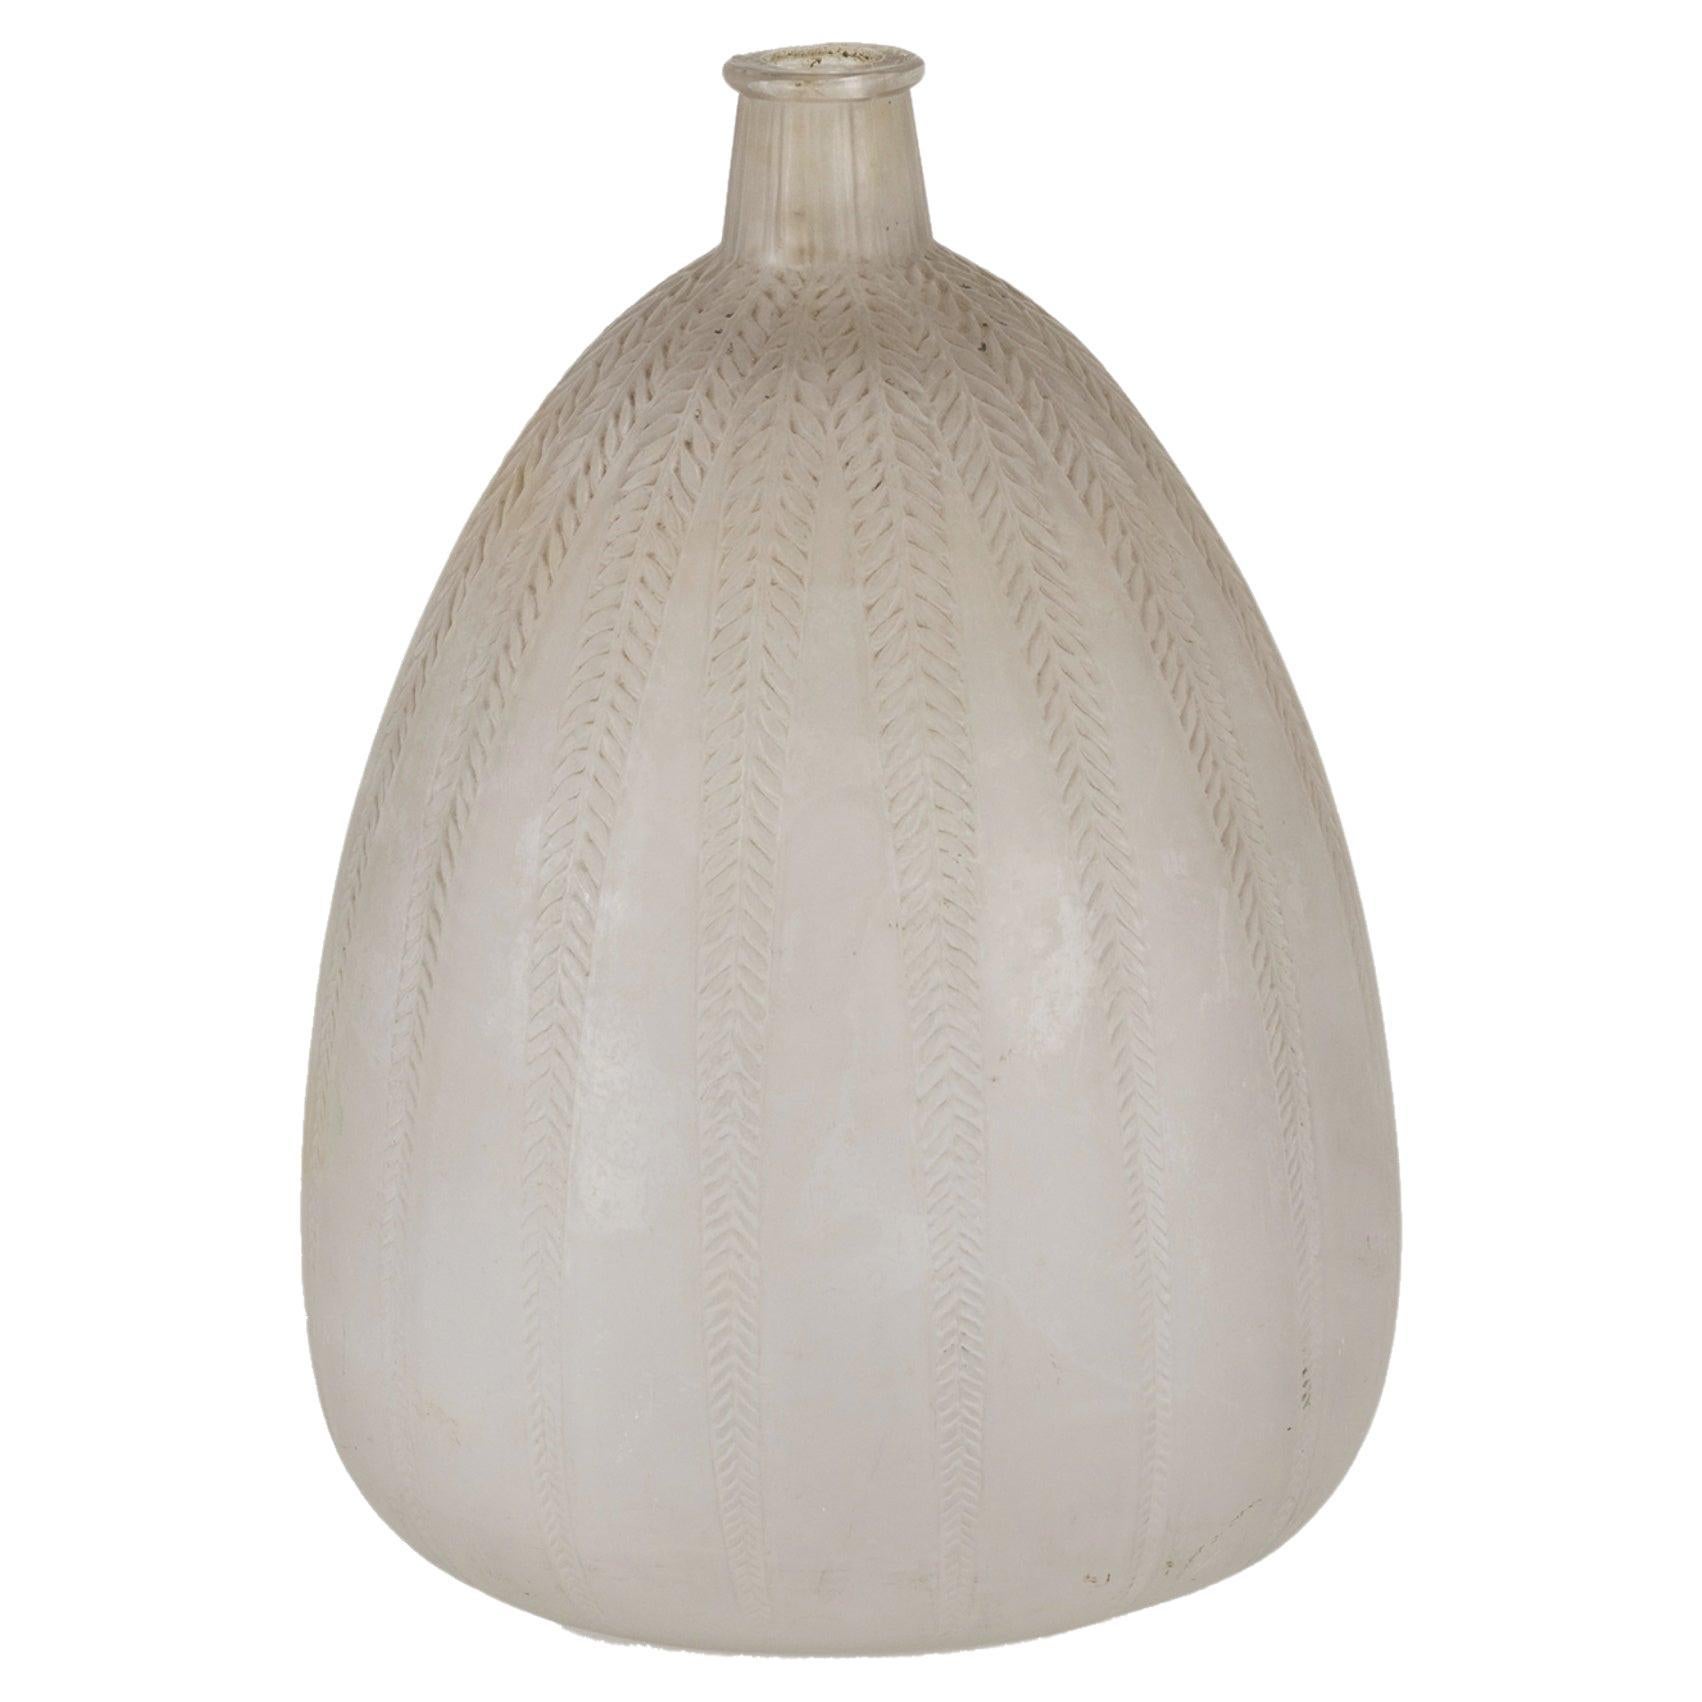 Mimosa Vase by Rene Lalique in Opalescent Glass, 1921 For Sale